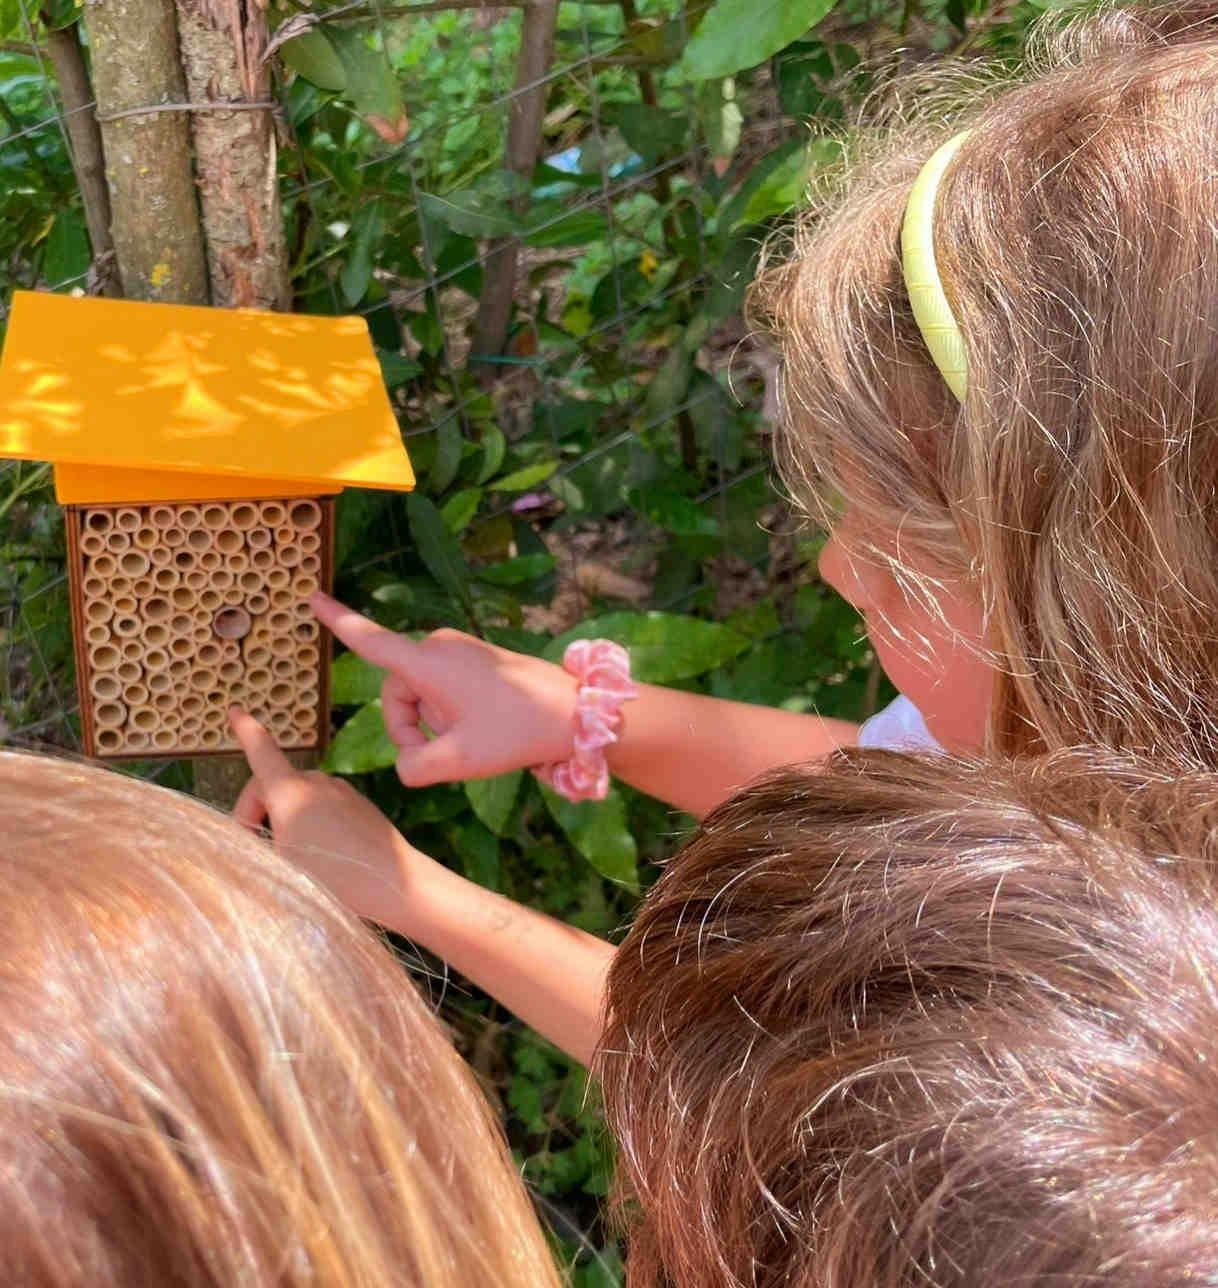 Biodiversity: 3Bee and initiatives for young people